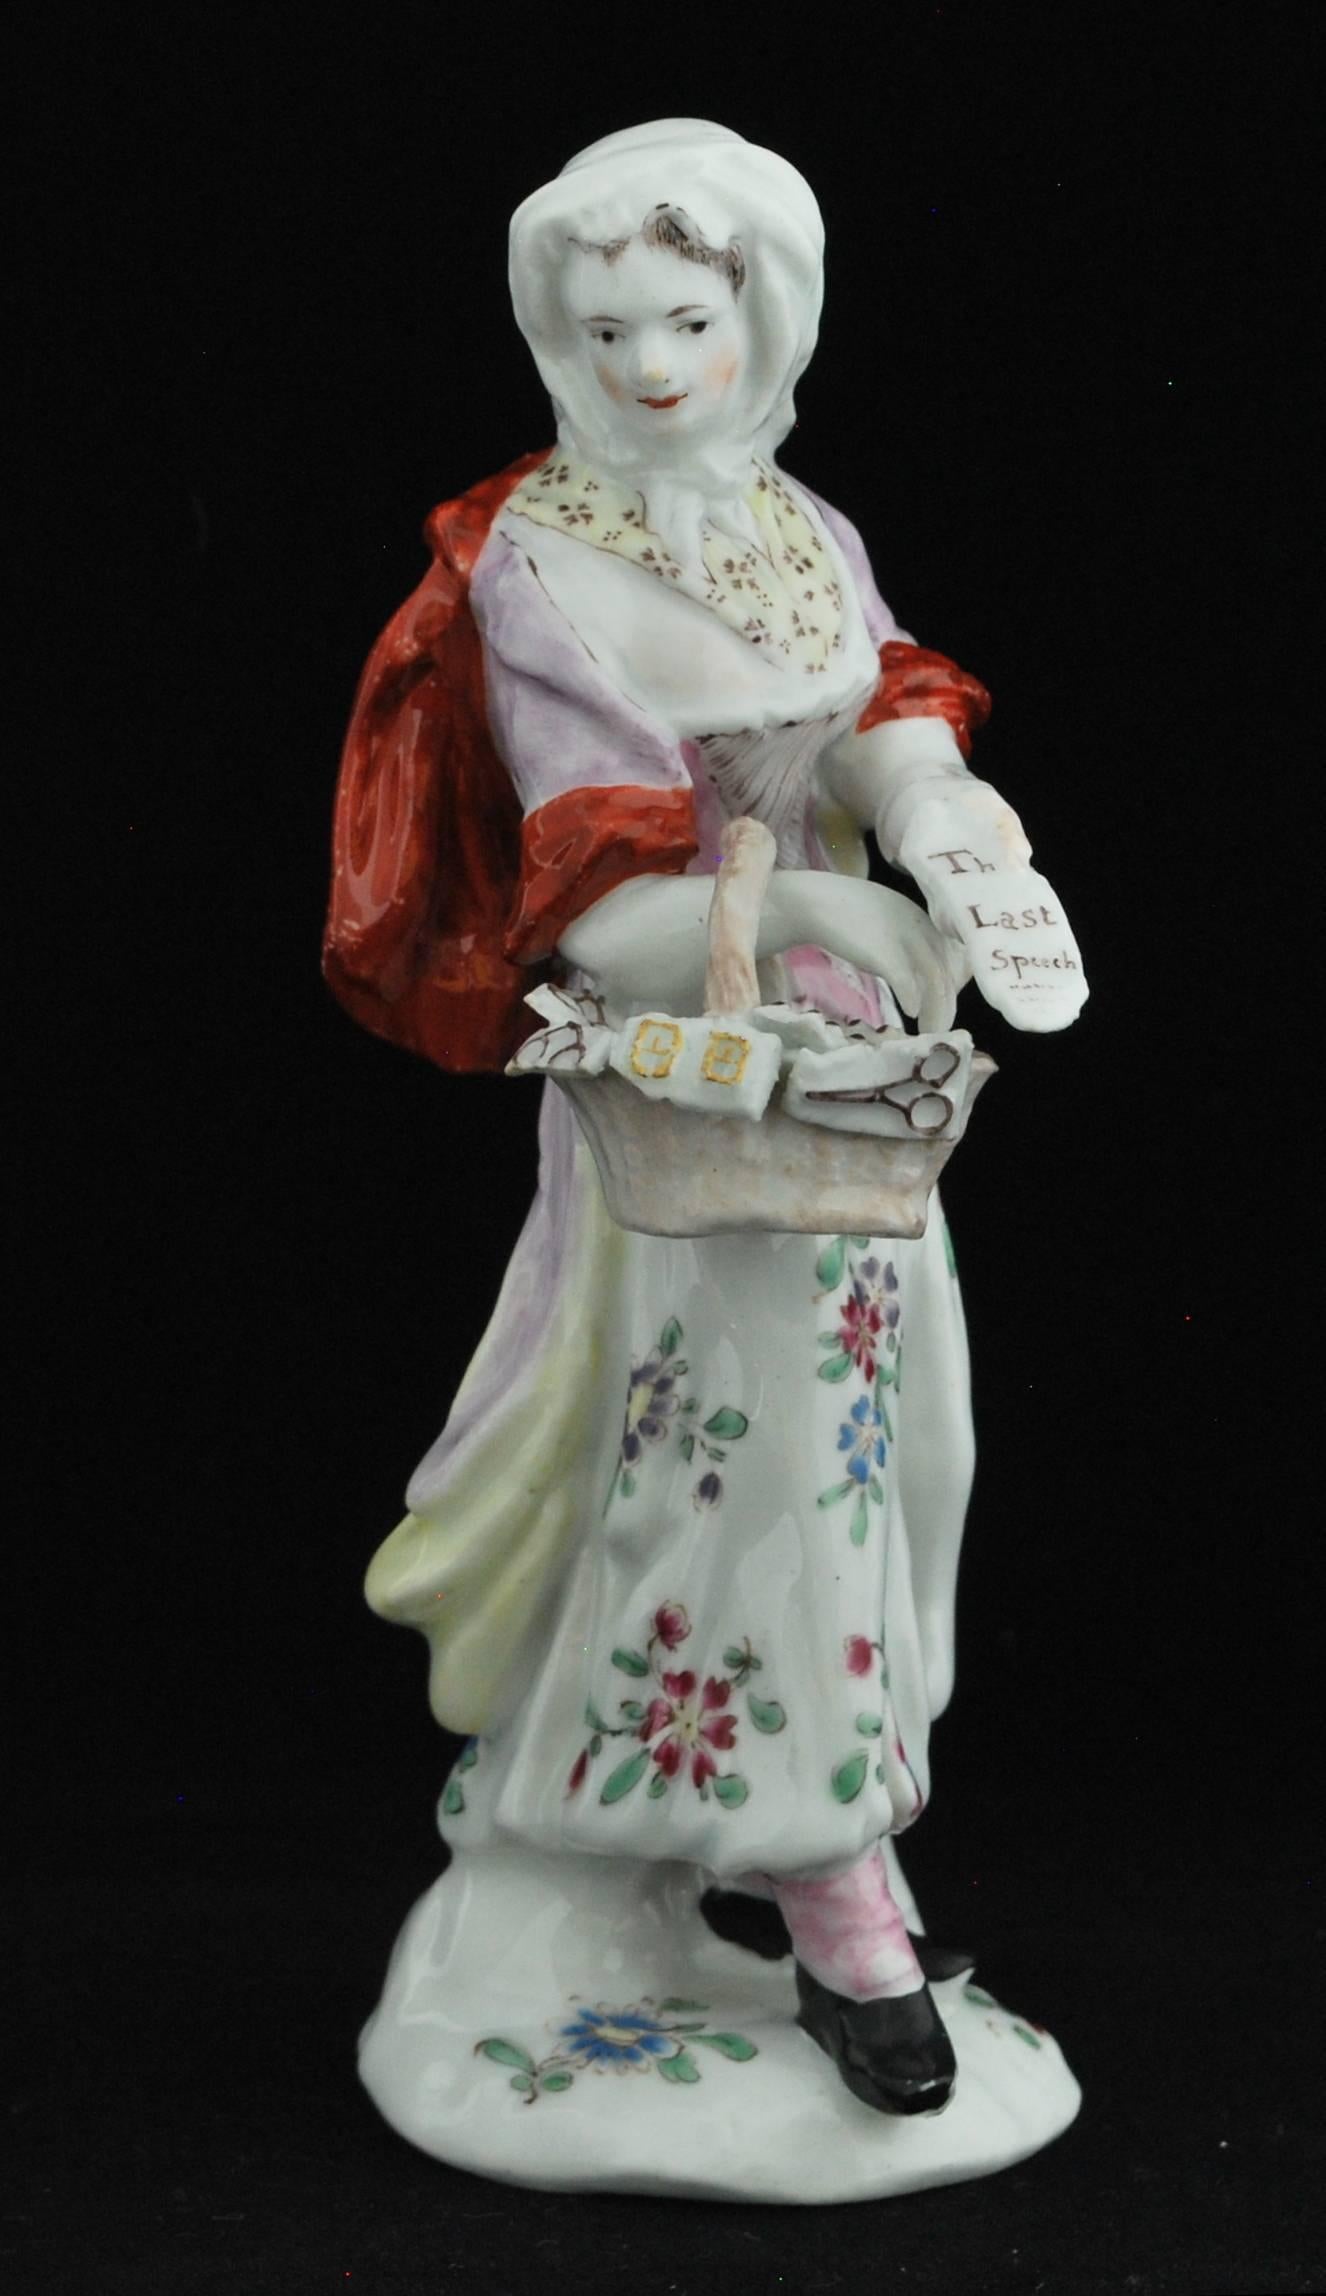 On a mound base decorated with painted floral sprigs. She wears a pale pink-mauve washed shift with iron-red sleeves and cloak, pale mauve and pink stomacher and a sprigged white shirt, a tied head scarf and patterned neck scarf and pink stockings